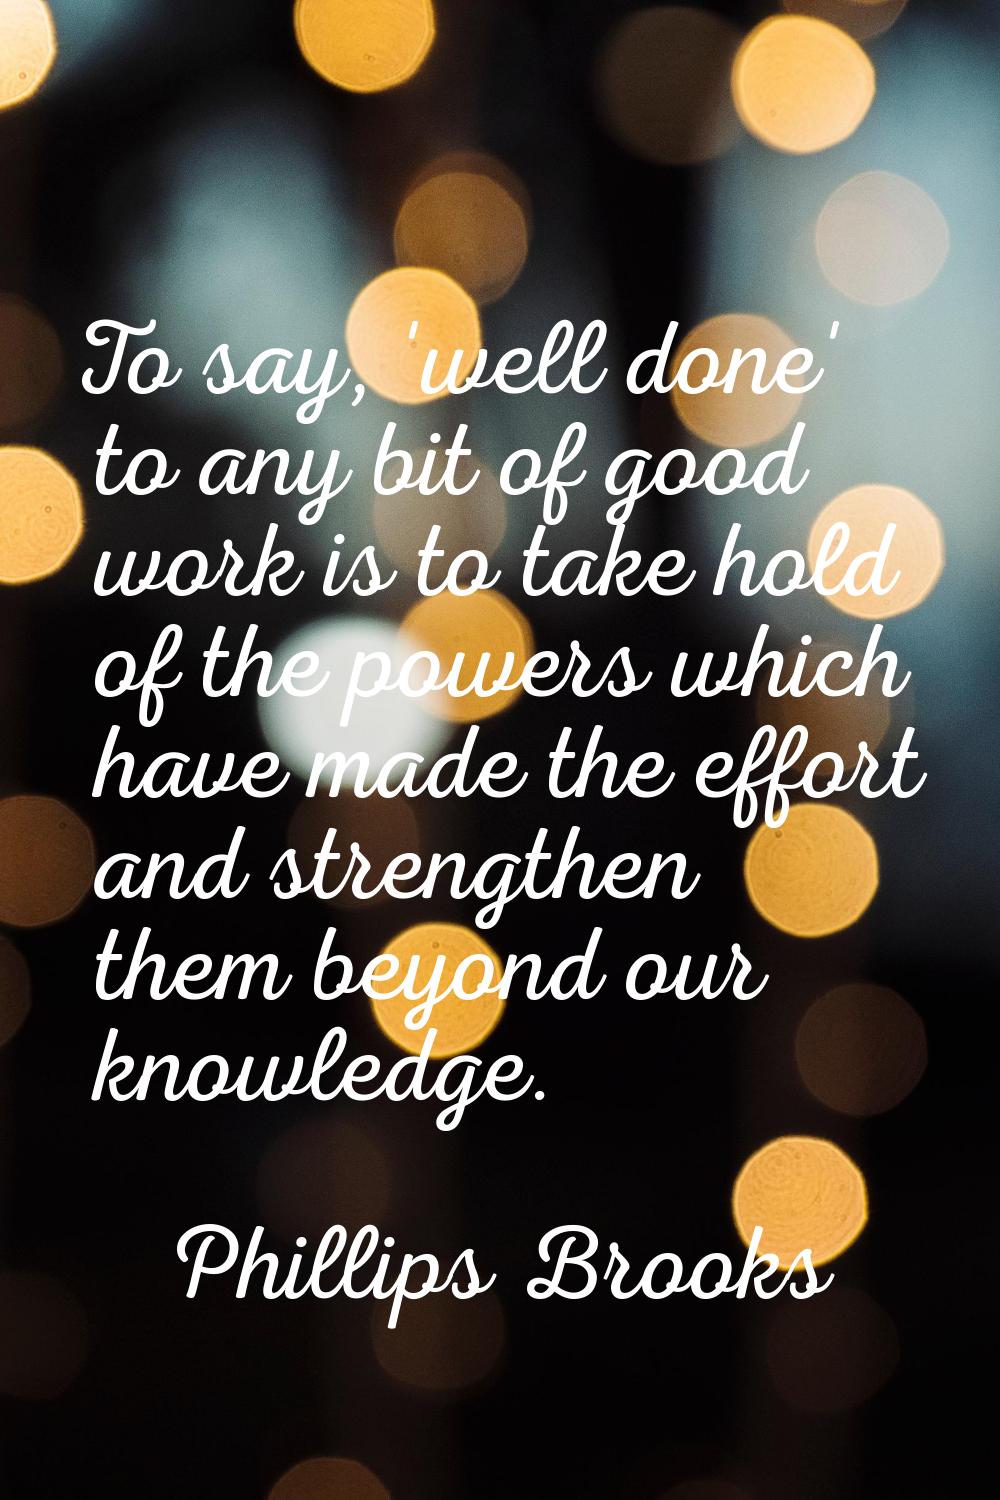 To say, 'well done' to any bit of good work is to take hold of the powers which have made the effor